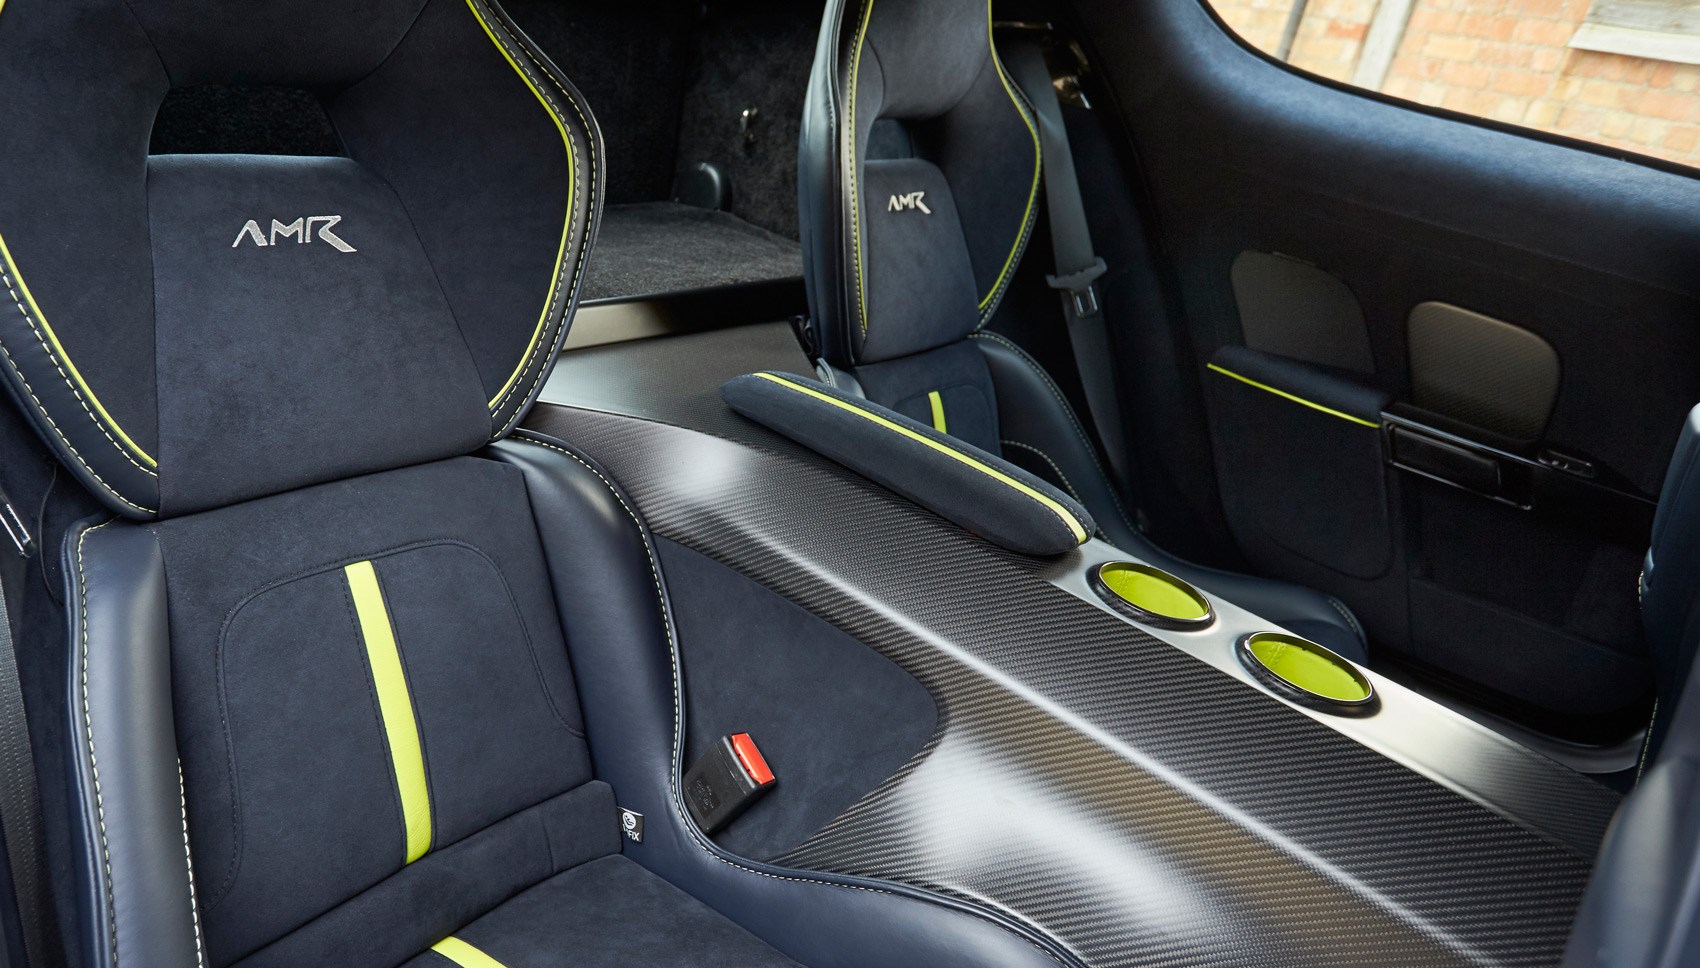 Aston Martin Rapide Amr 2019 Review The Fat Lady Sings